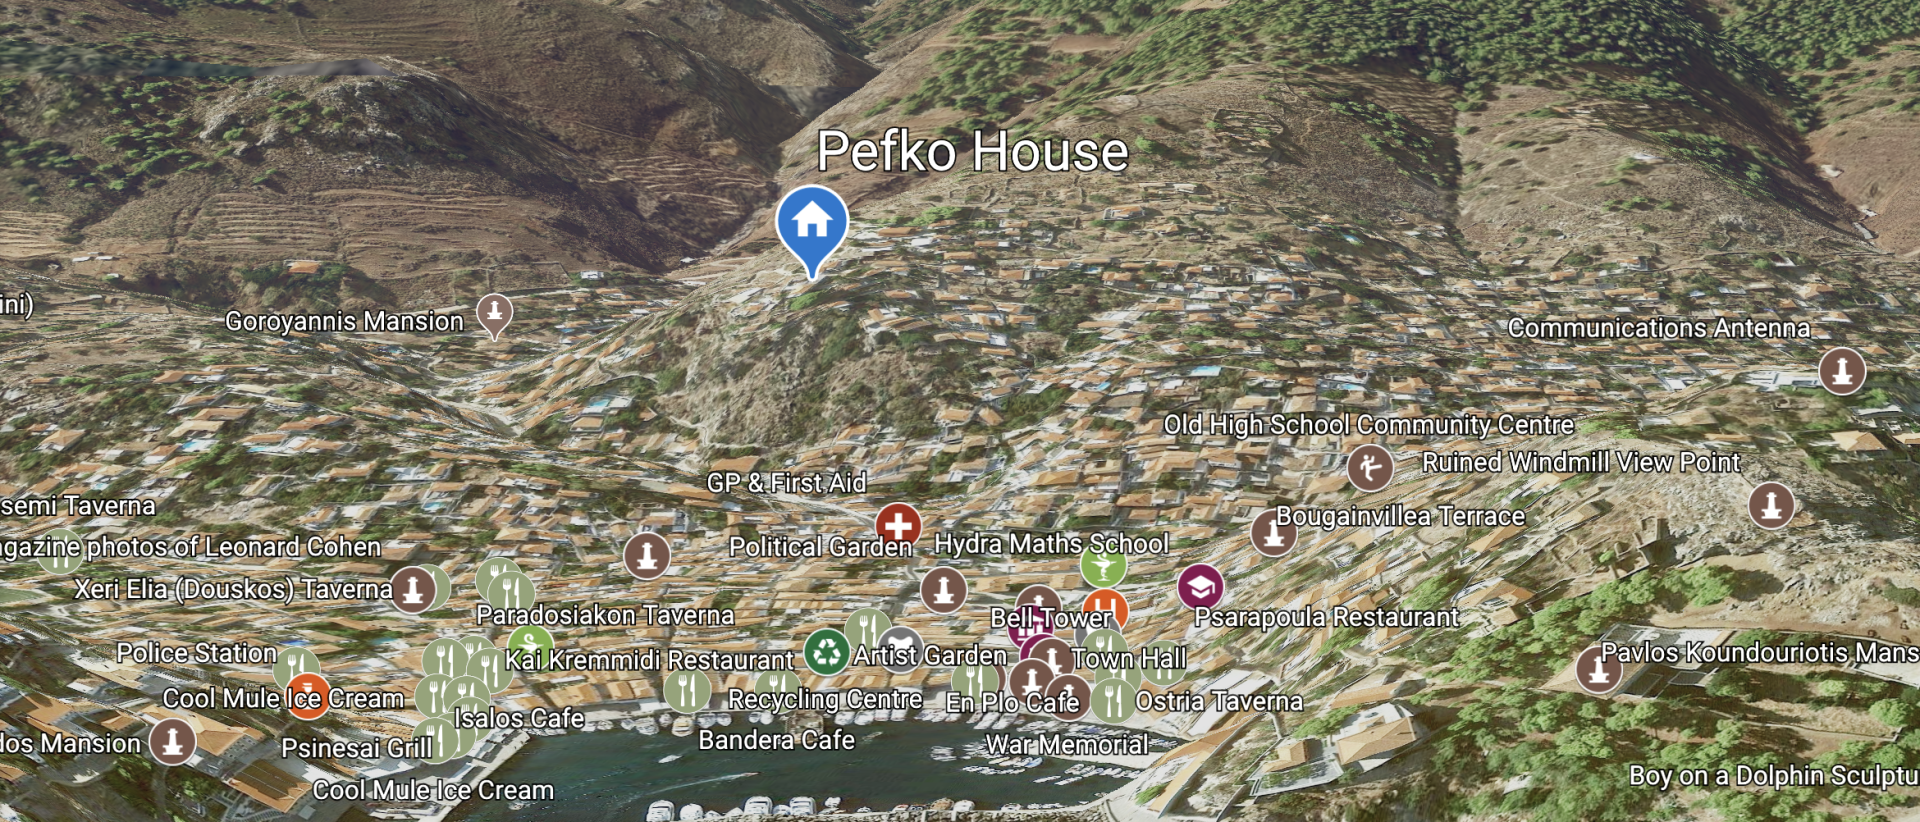 Location Map for Pefko House on Hydra Island Greece